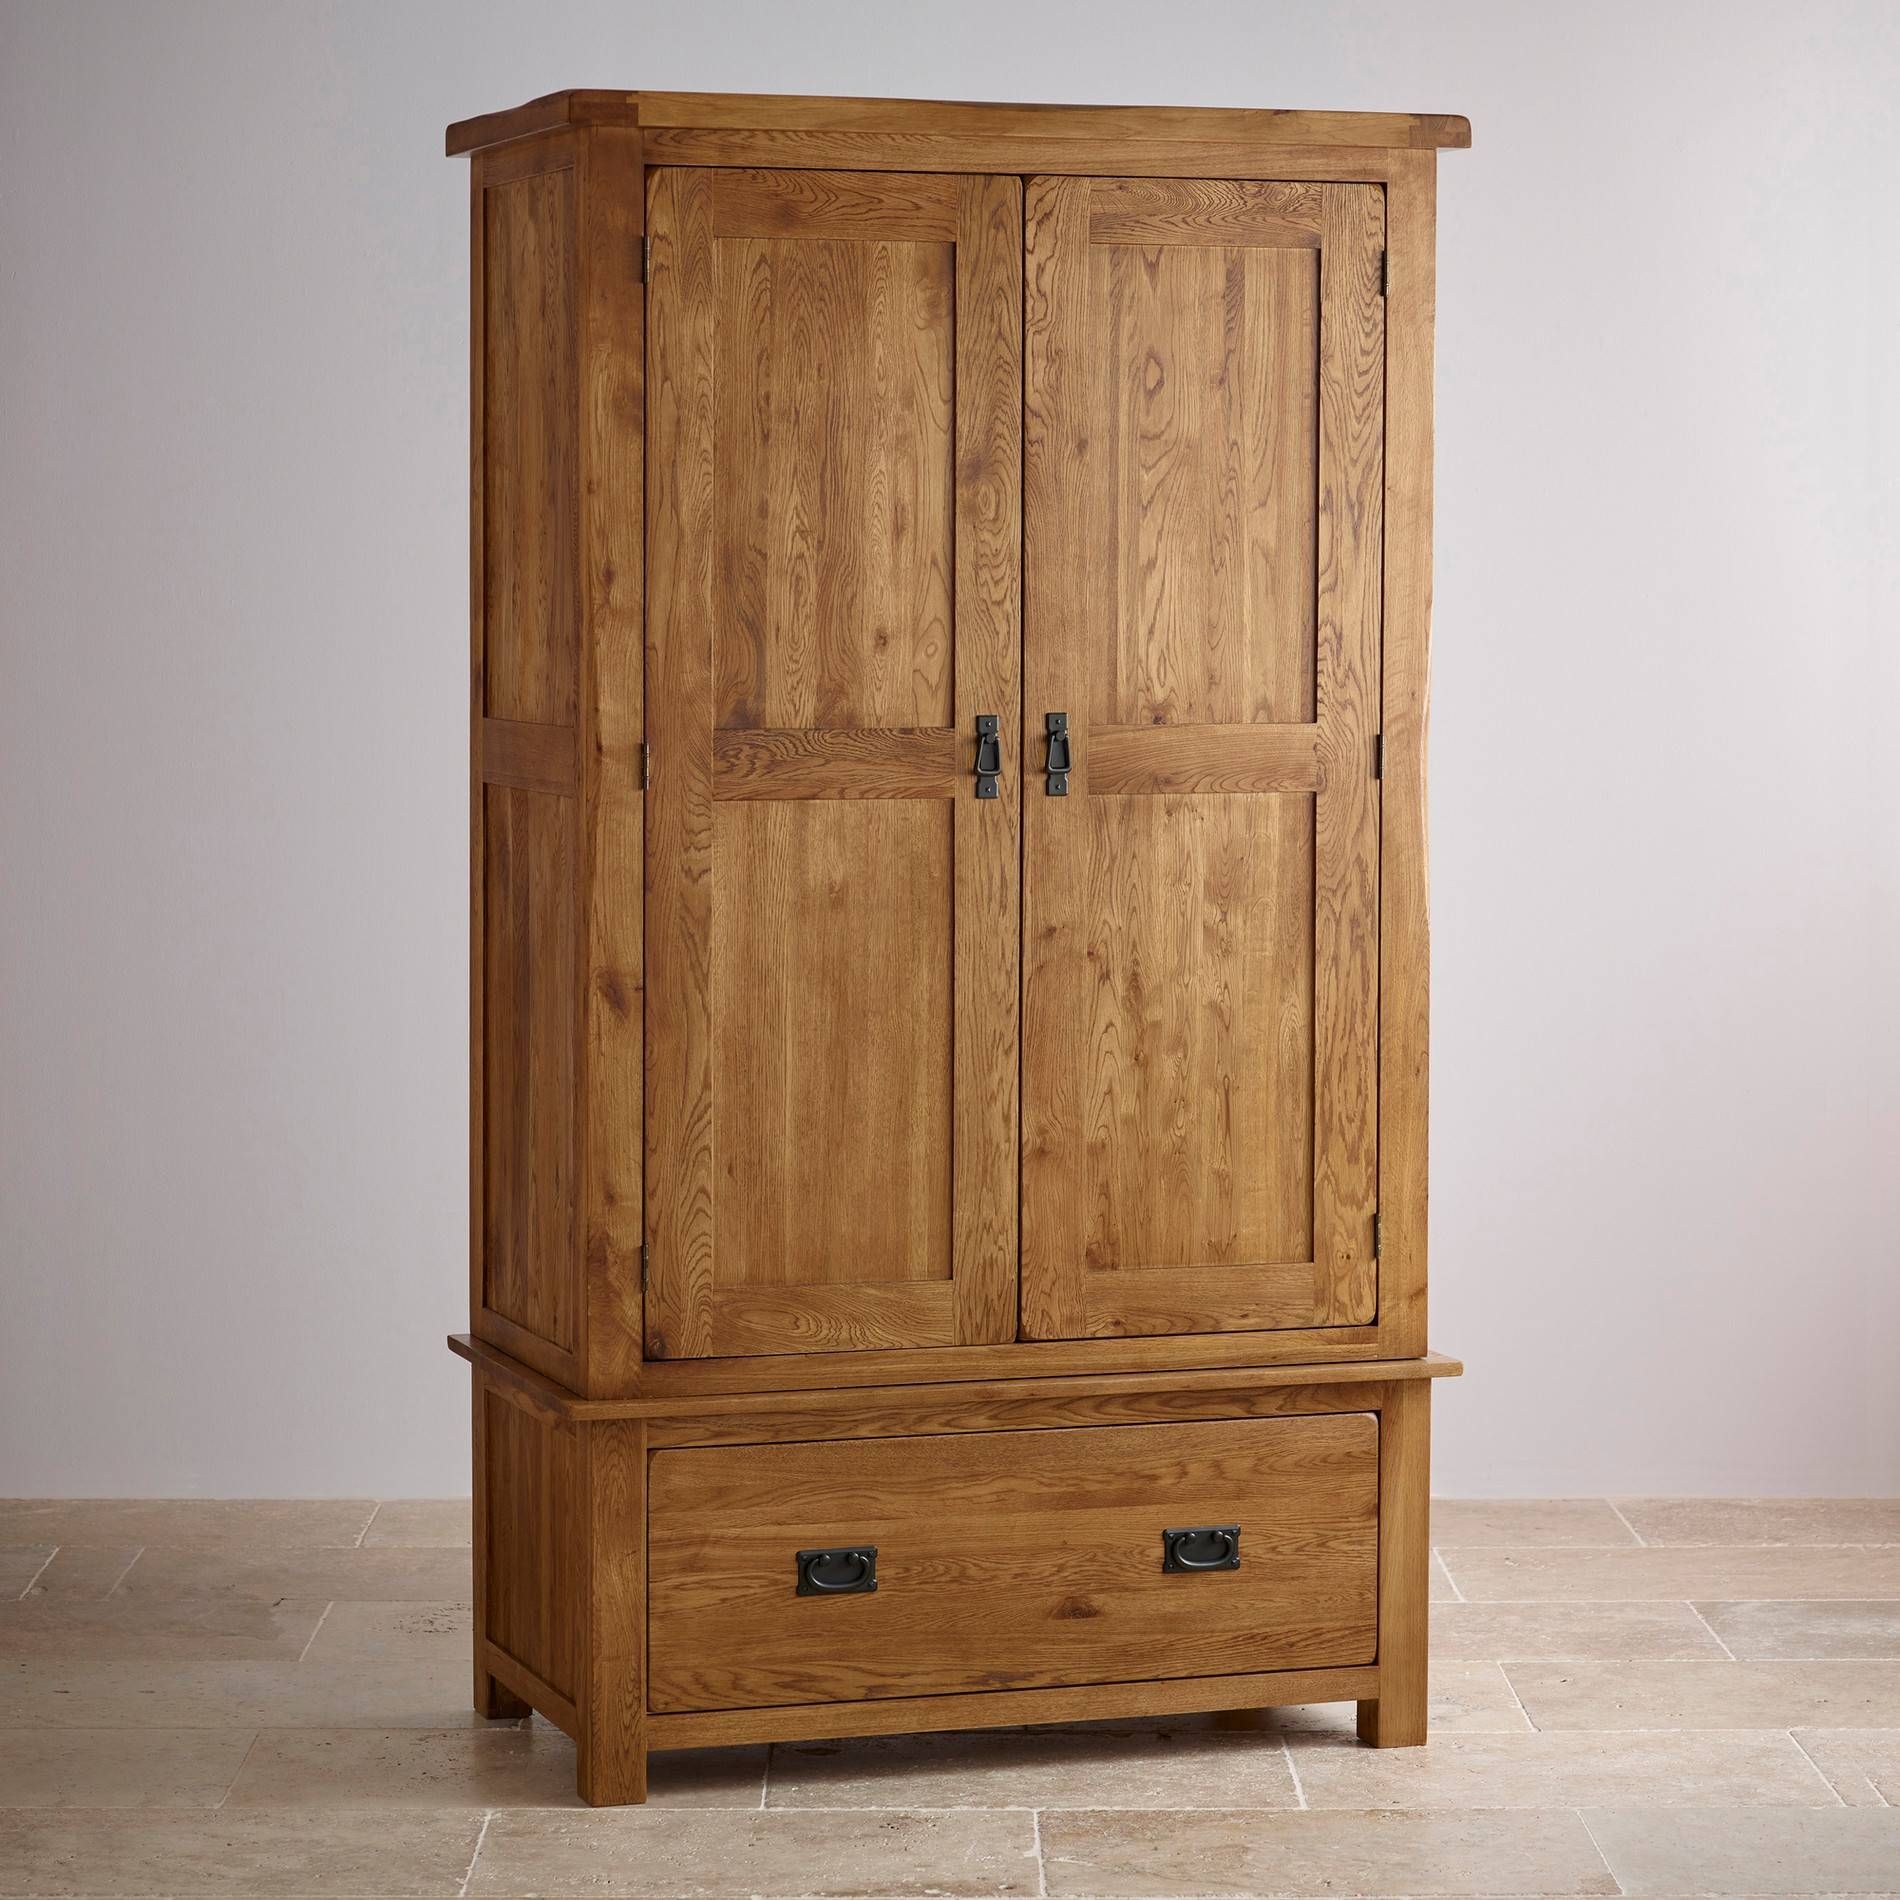 Solid Hardwood Wardrobes | Finance Available | Oak Furniture Land With Regard To Oak Wardrobes For Sale (View 1 of 15)